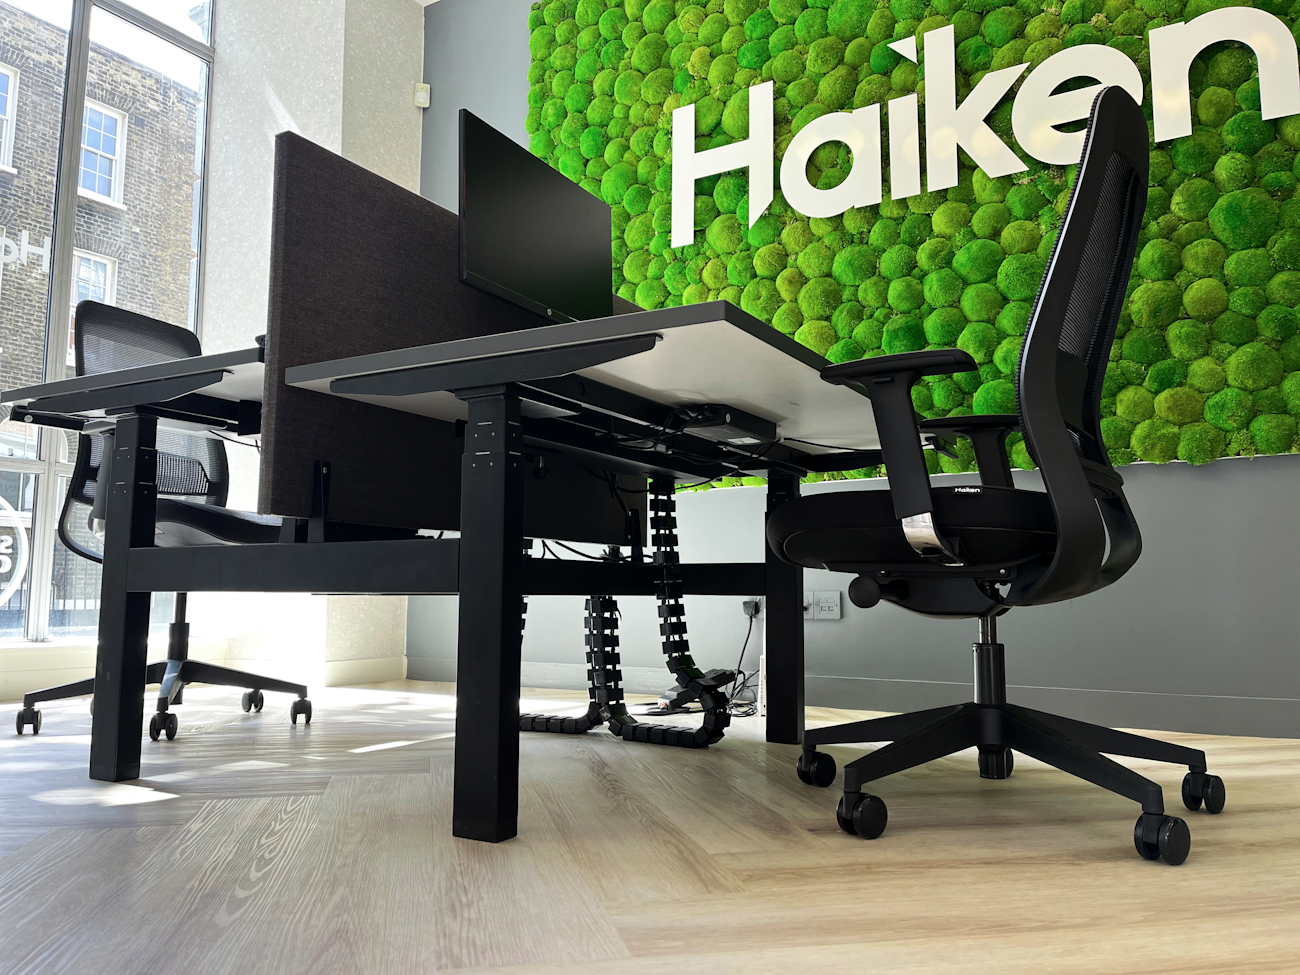 5 things to consider when choosing sustainable office furniture for your workplace